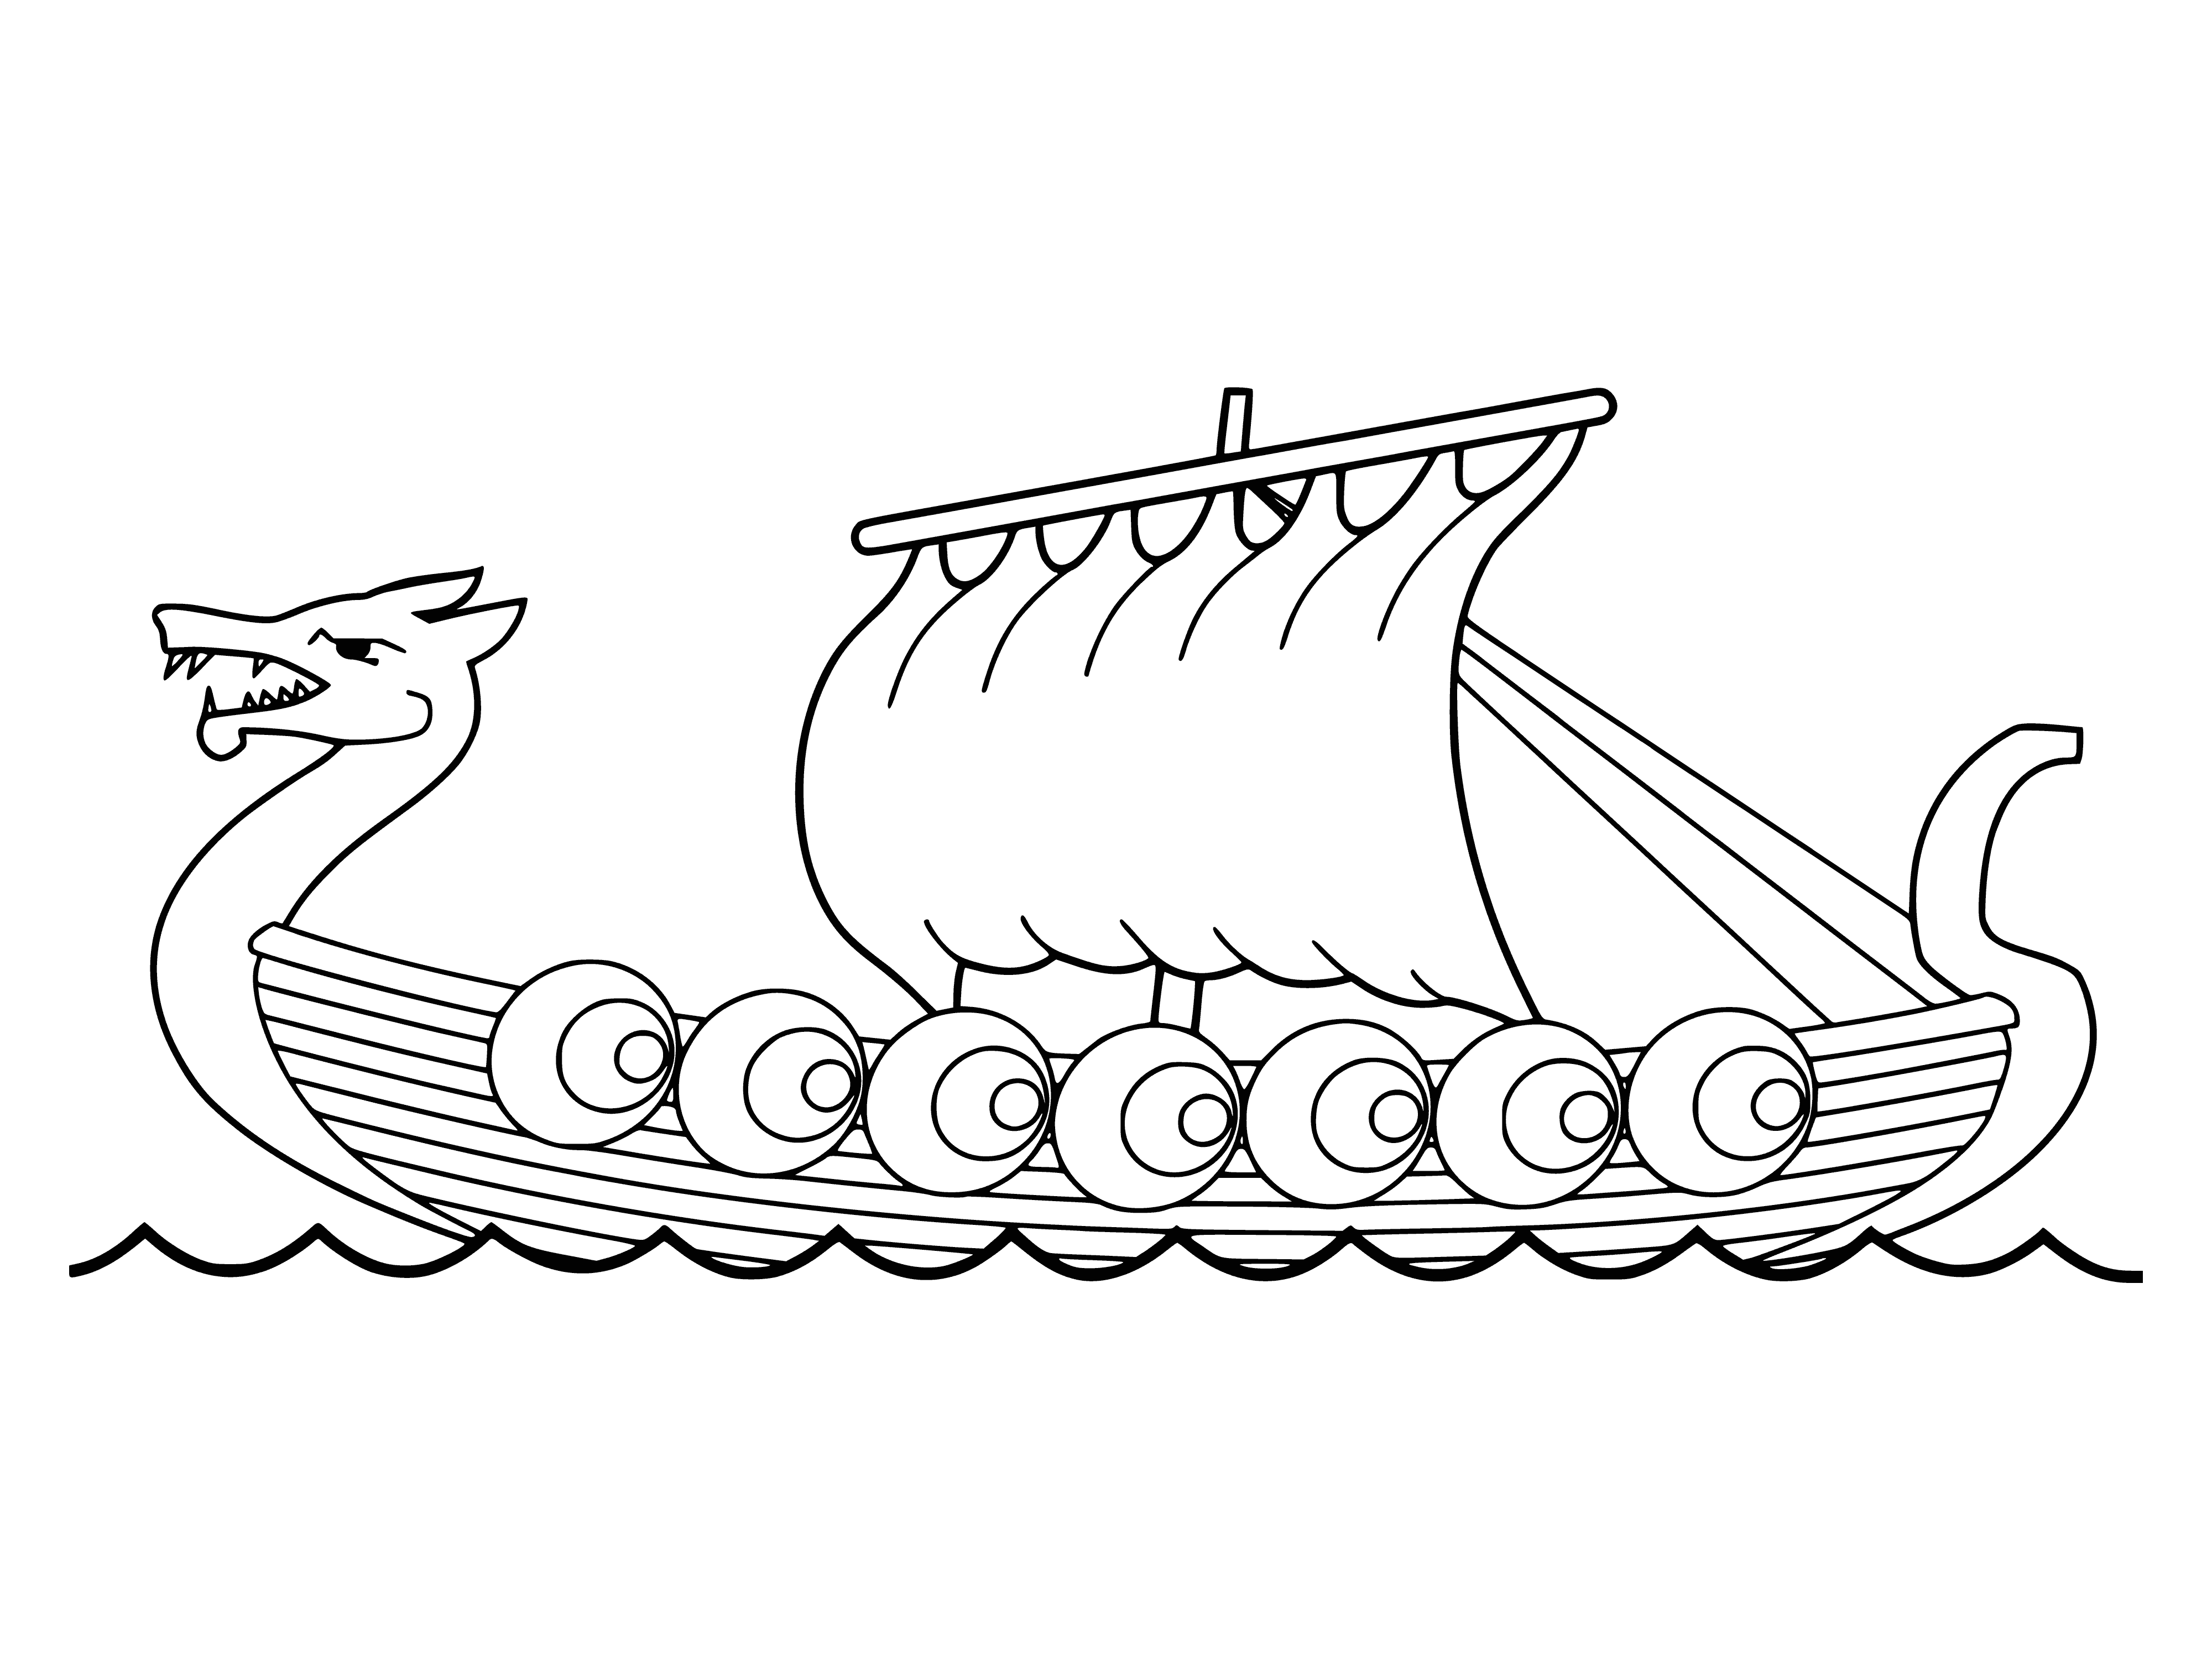 coloring page: Viking ship: long, narrow w/pointed bow/stern, oars, large sail, colorful carvings, dragon figurehead.